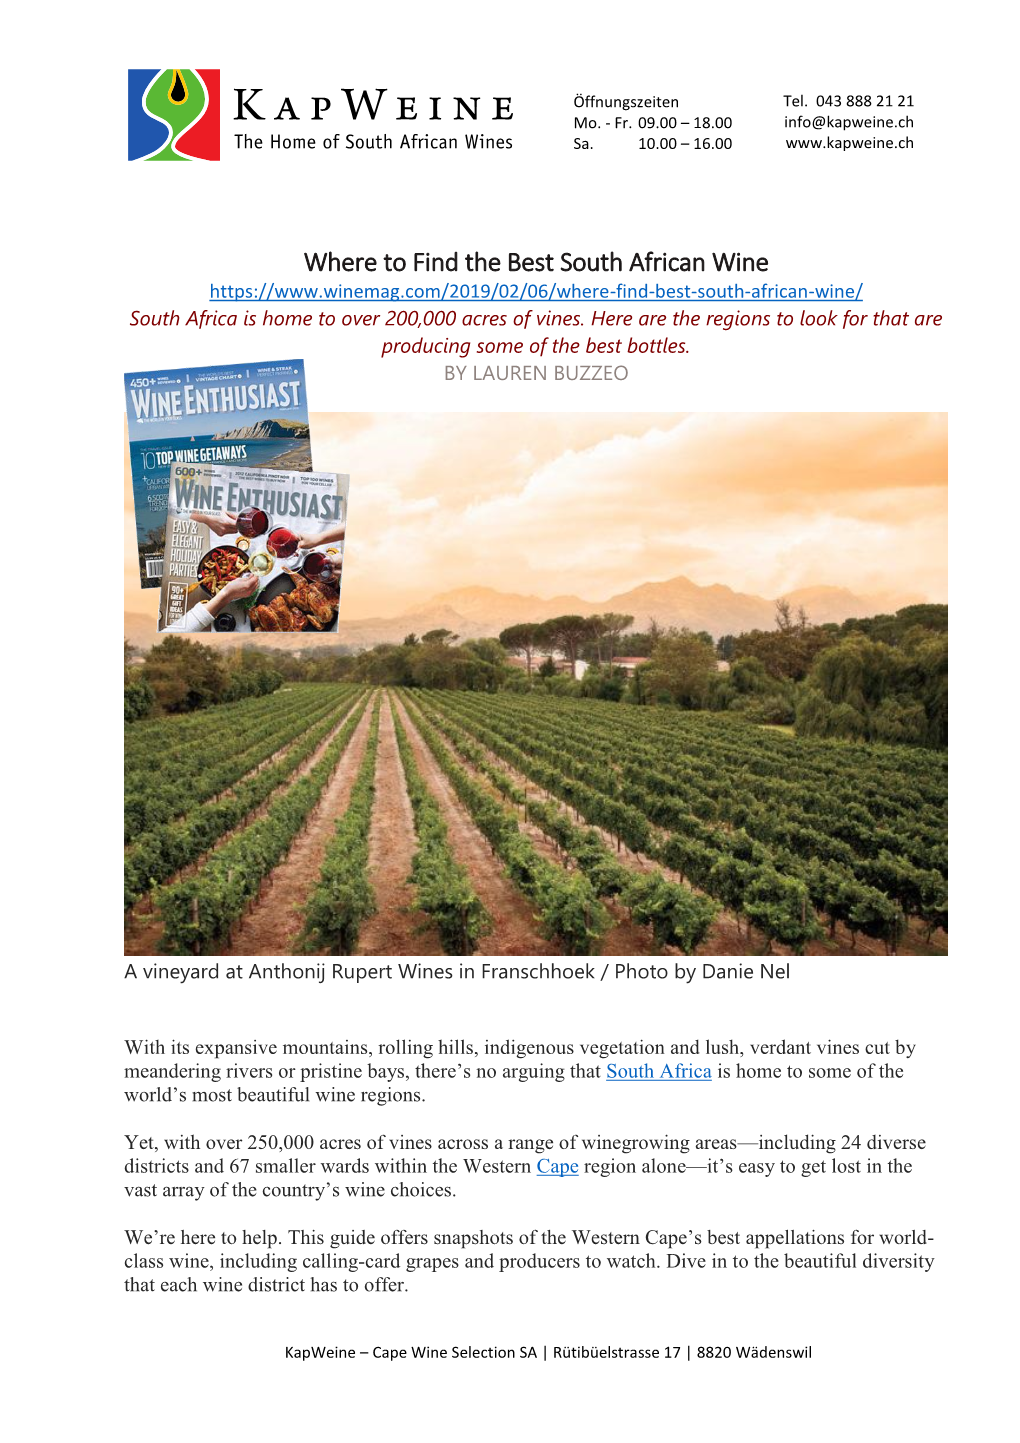 Where to Find the Best South African Wine South Africa Is Home to Over 200,000 Acres of Vines